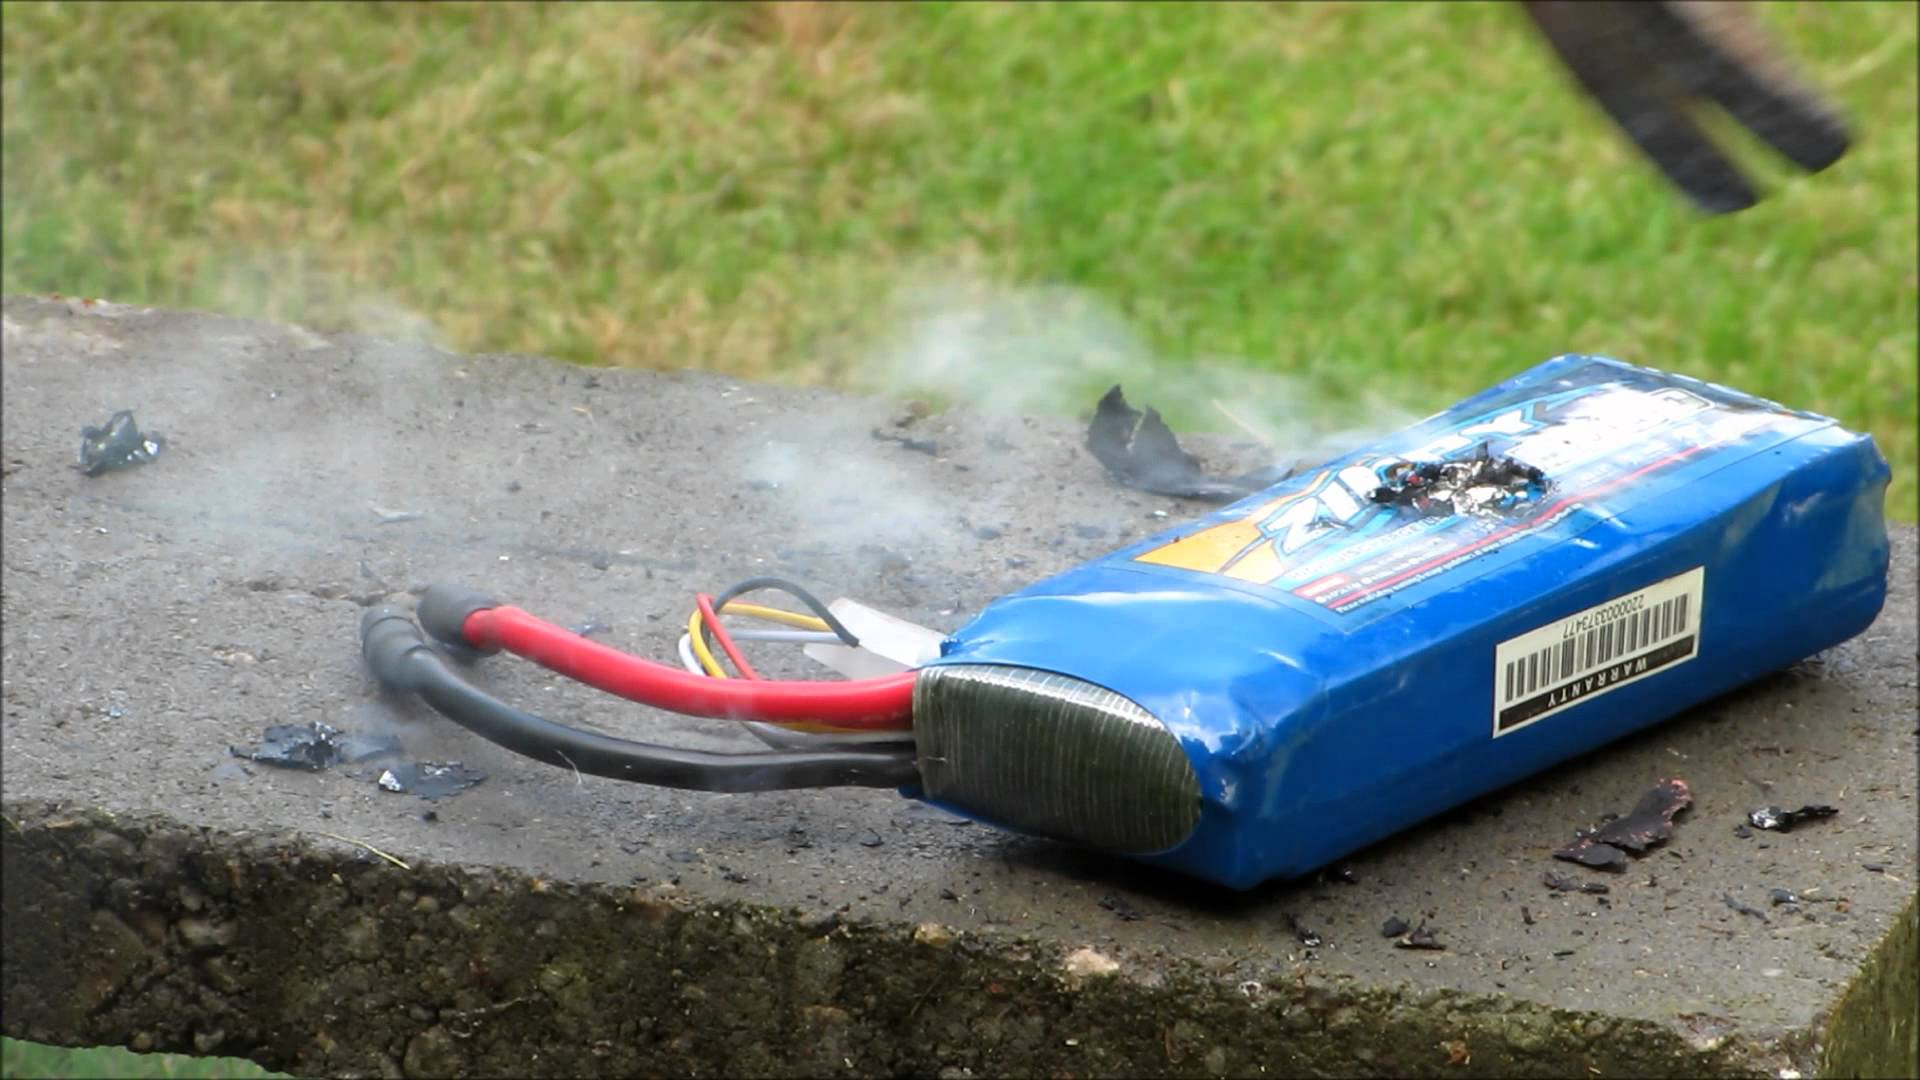  LiPo battery charger . If you don't know much about LiPo battery